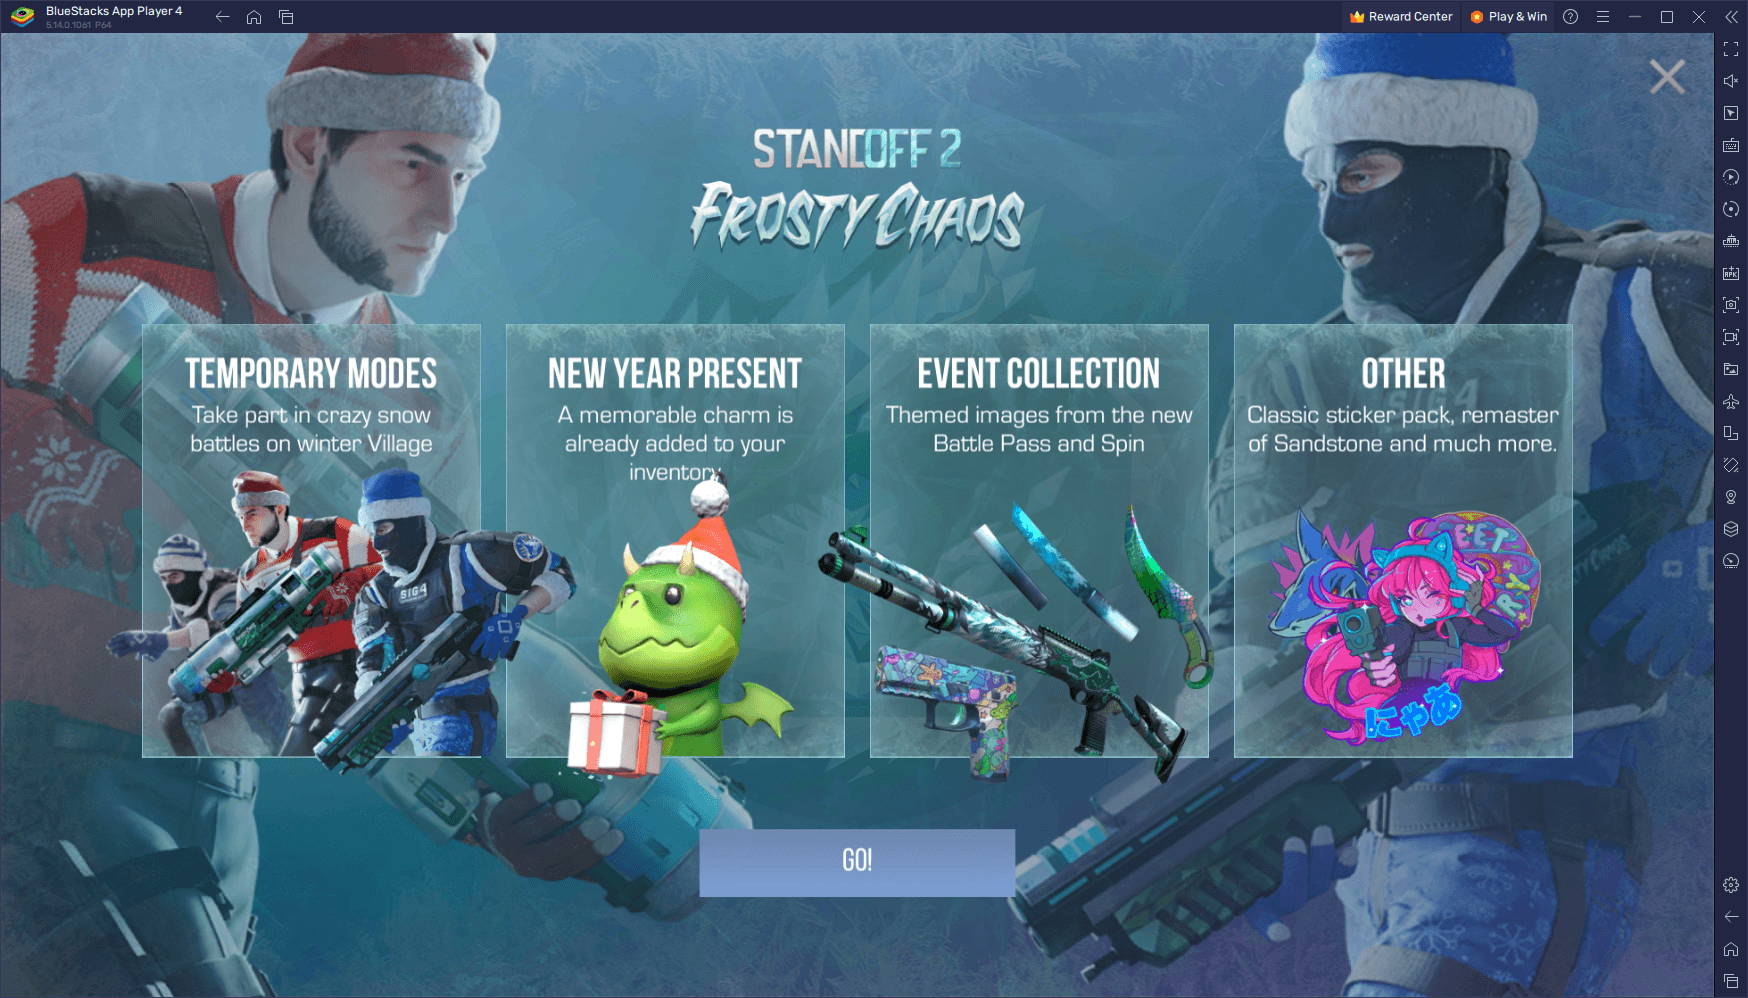 Explore the Frosty Chaos Update for Standoff 2 on PC with BlueStacks